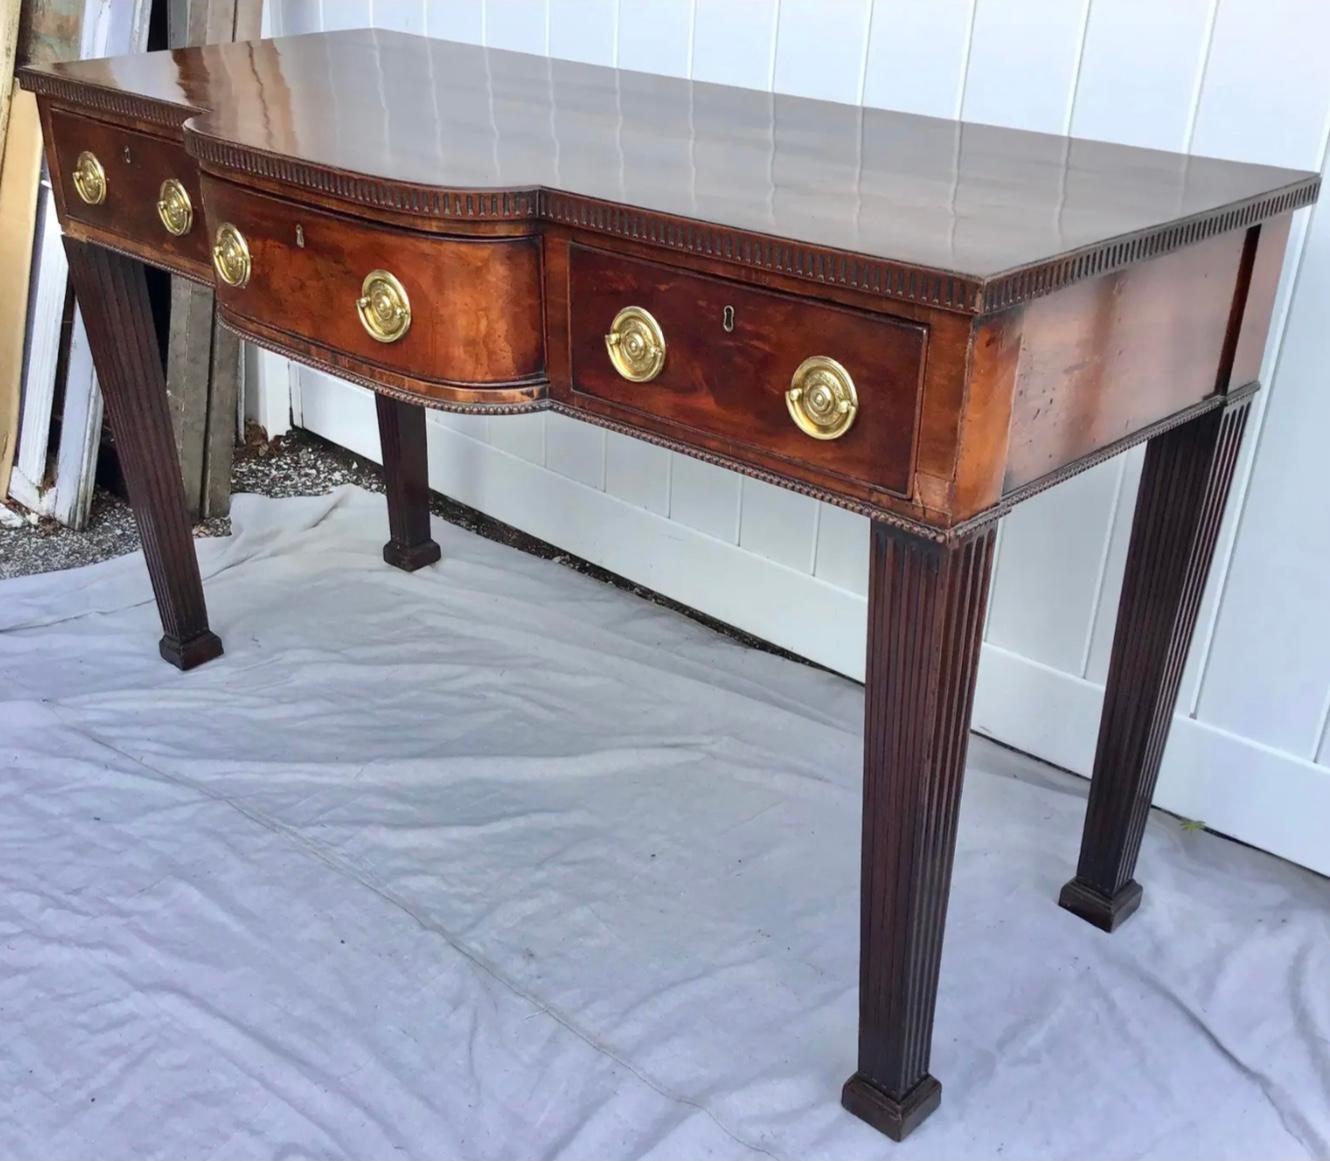 English Georgian Chippendale mahogany server. Center bow front top with three drawers, fluted trim, center bowfront drawer flanked by single drawer either side, brass pulls, fluted tapered legs. Wonderful old mellow patina.